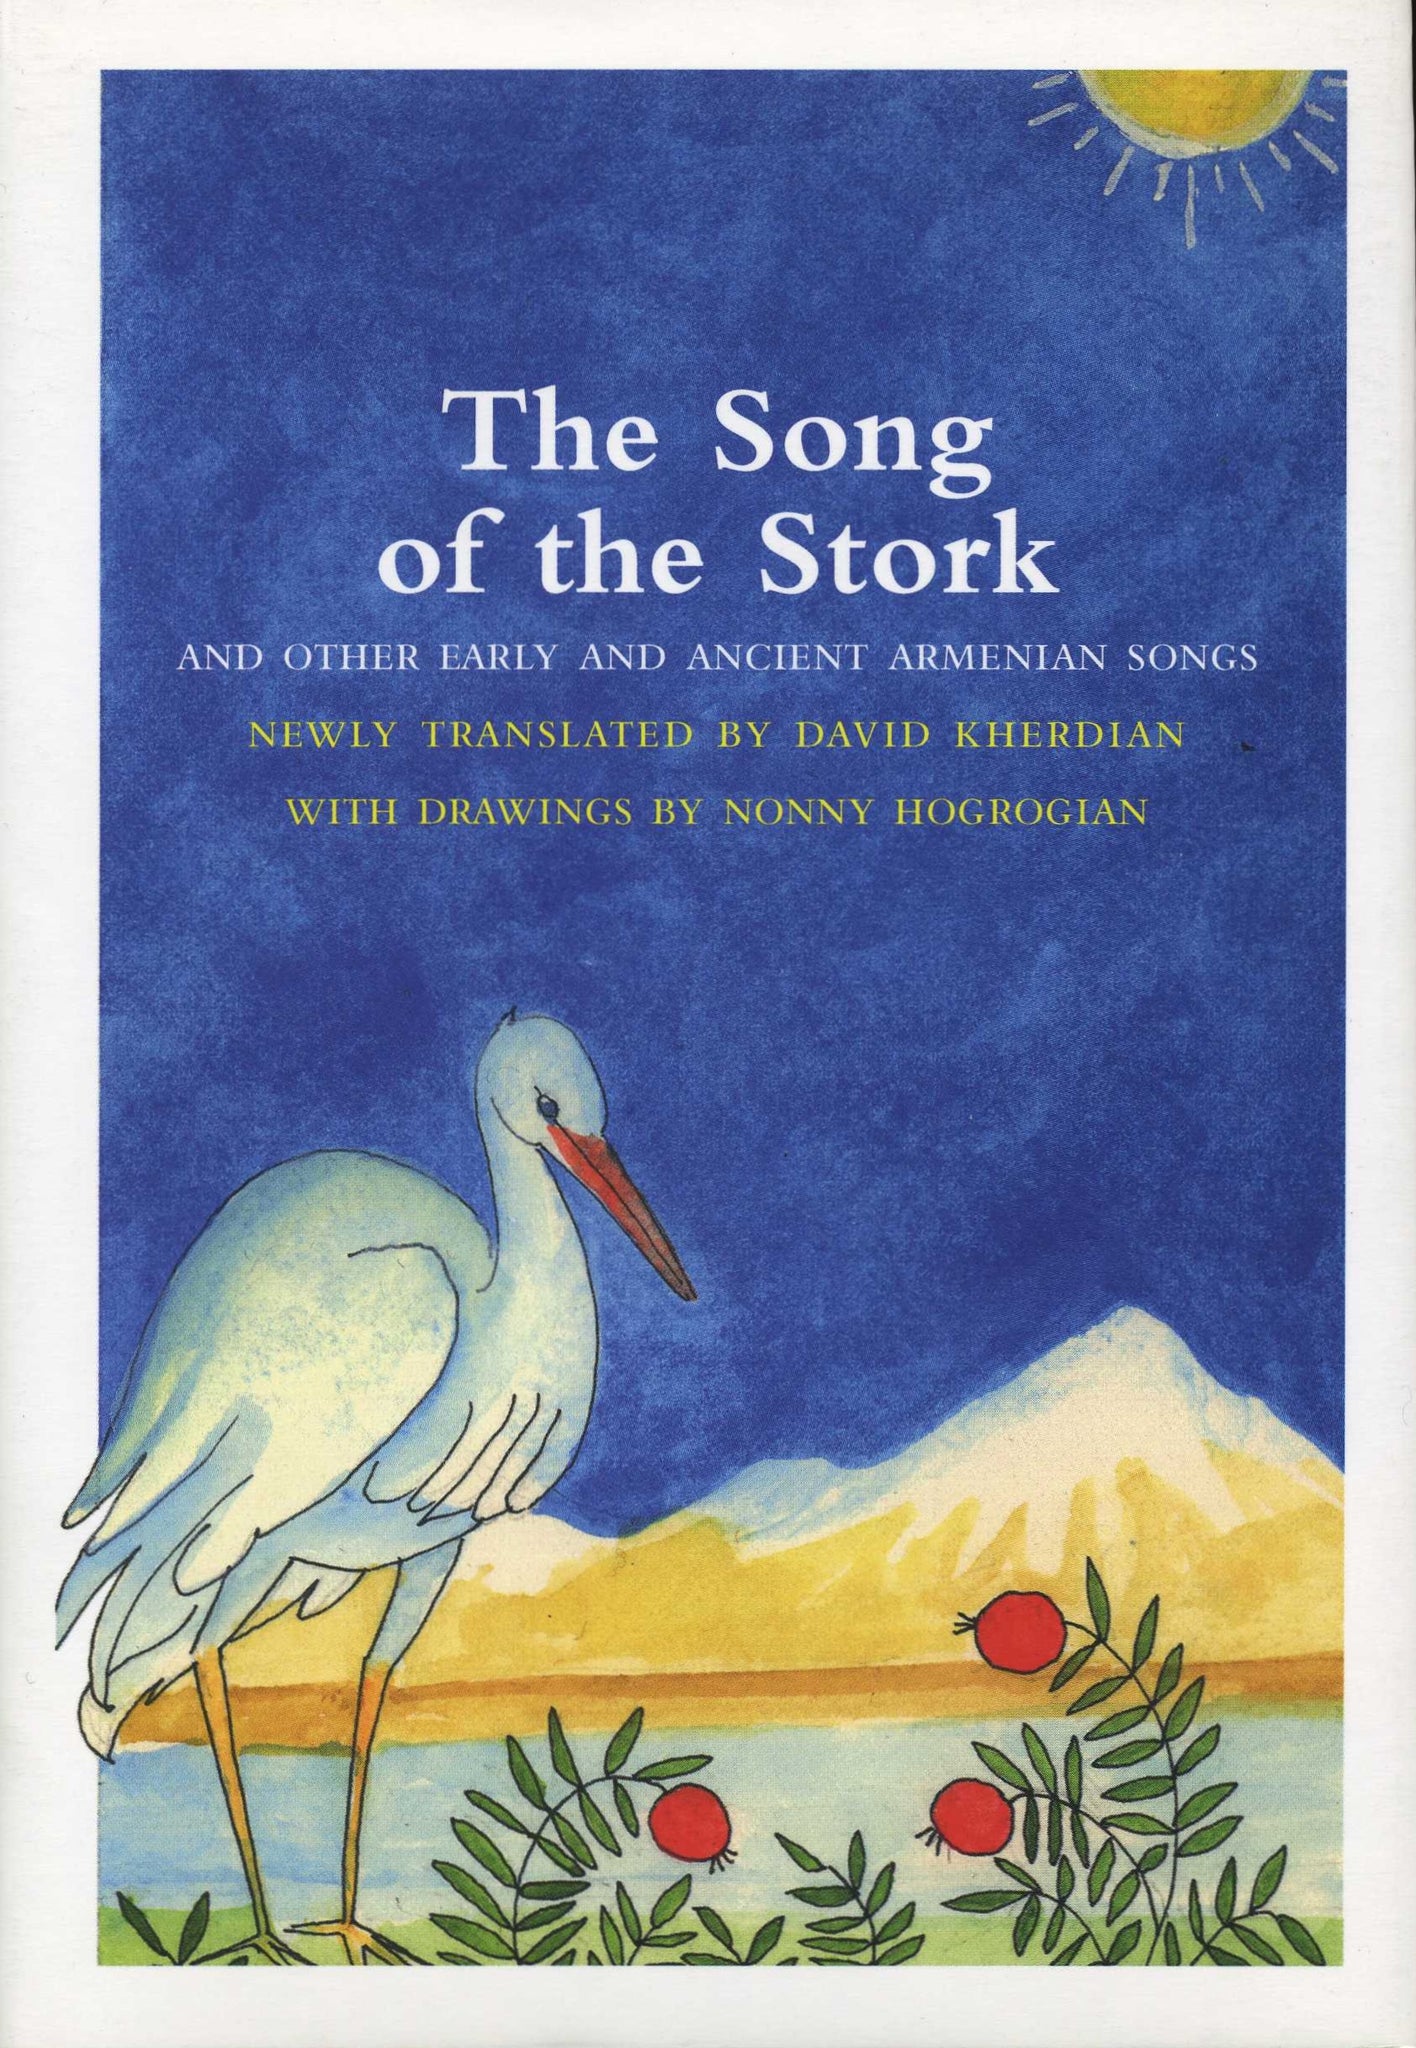 SONG OF THE STORK, THE